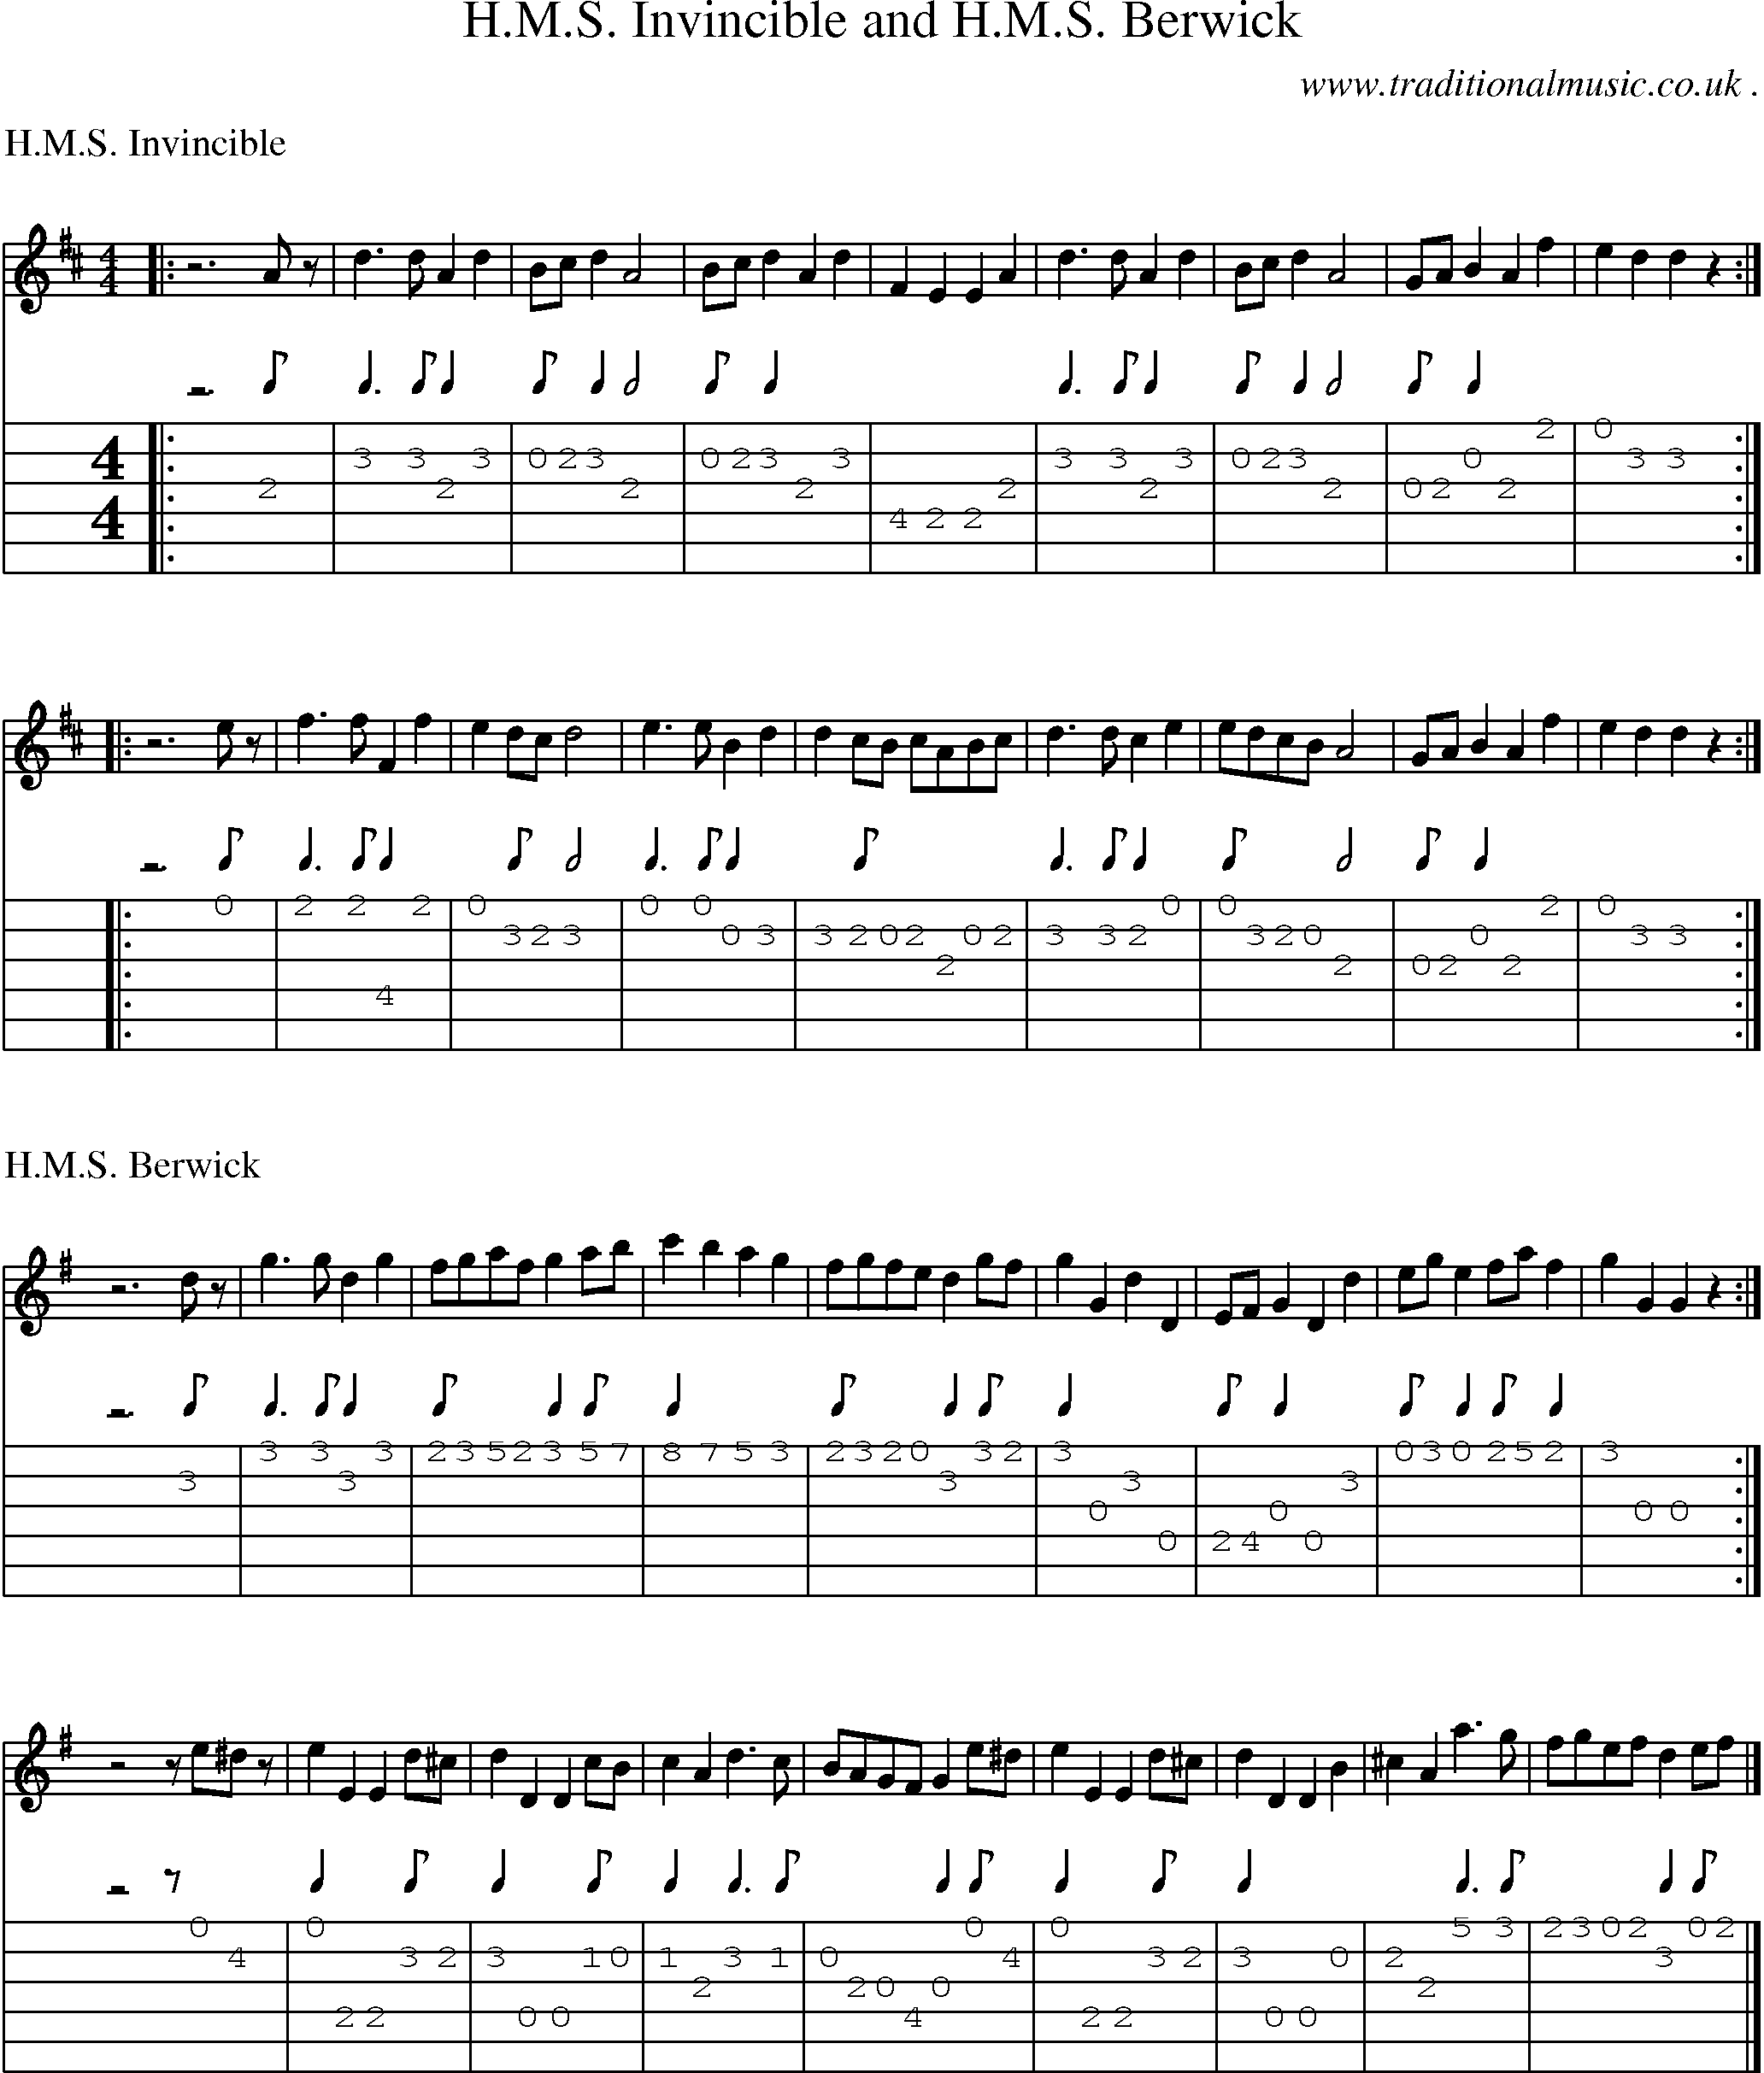 Sheet-music  score, Chords and Guitar Tabs for Hms Invincible And Hms Berwick